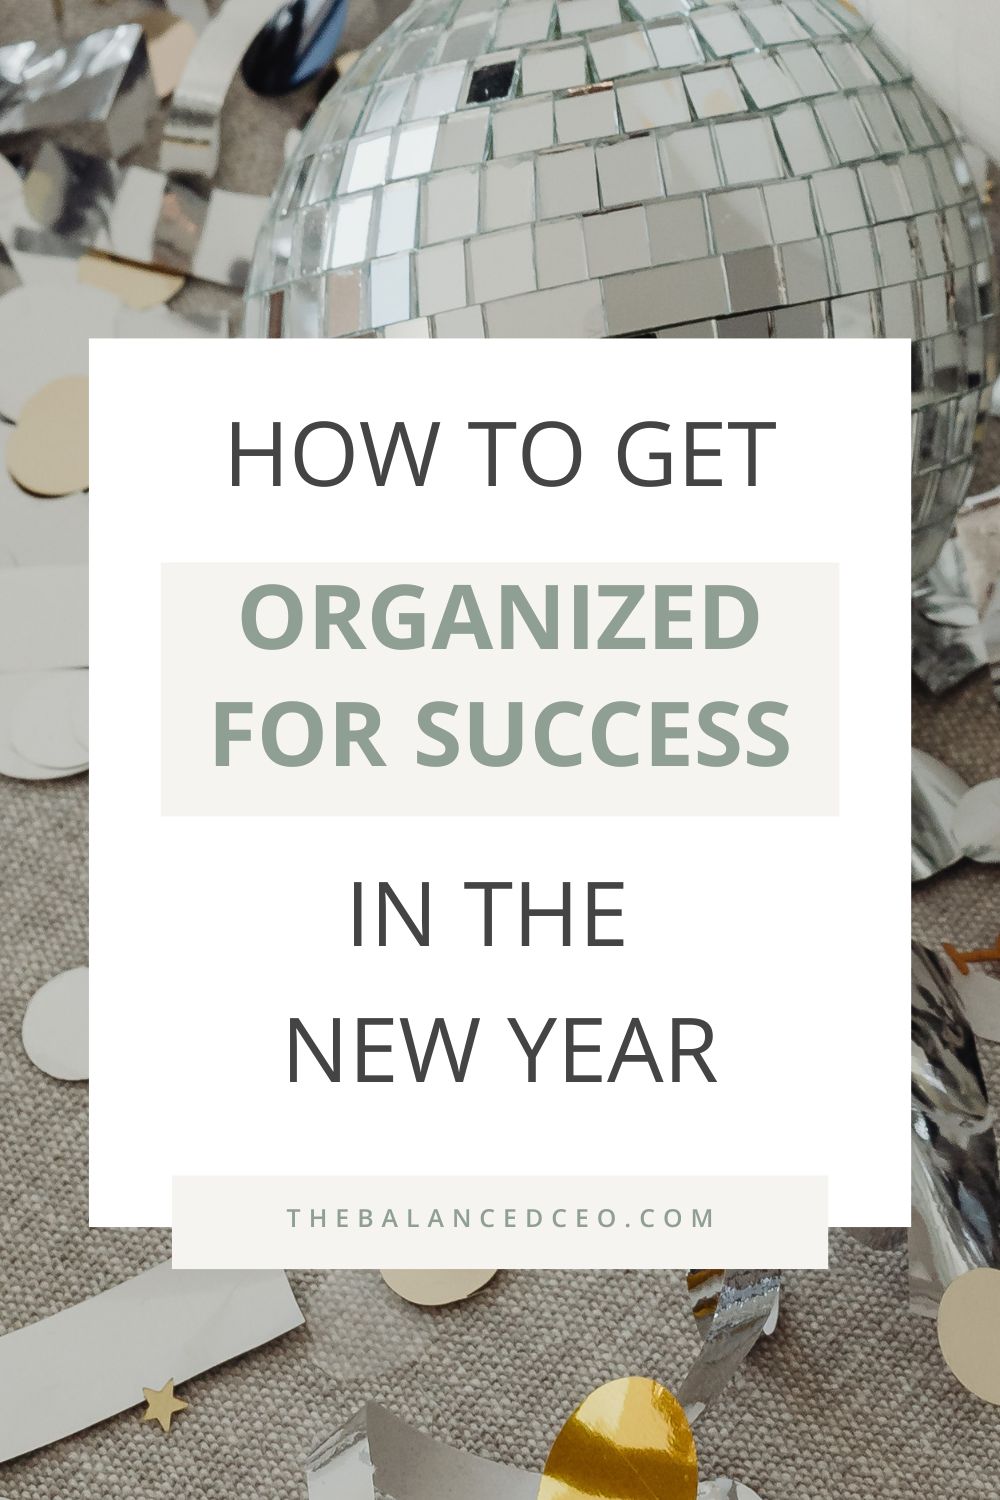 How to Get Organized for Success in the New Year